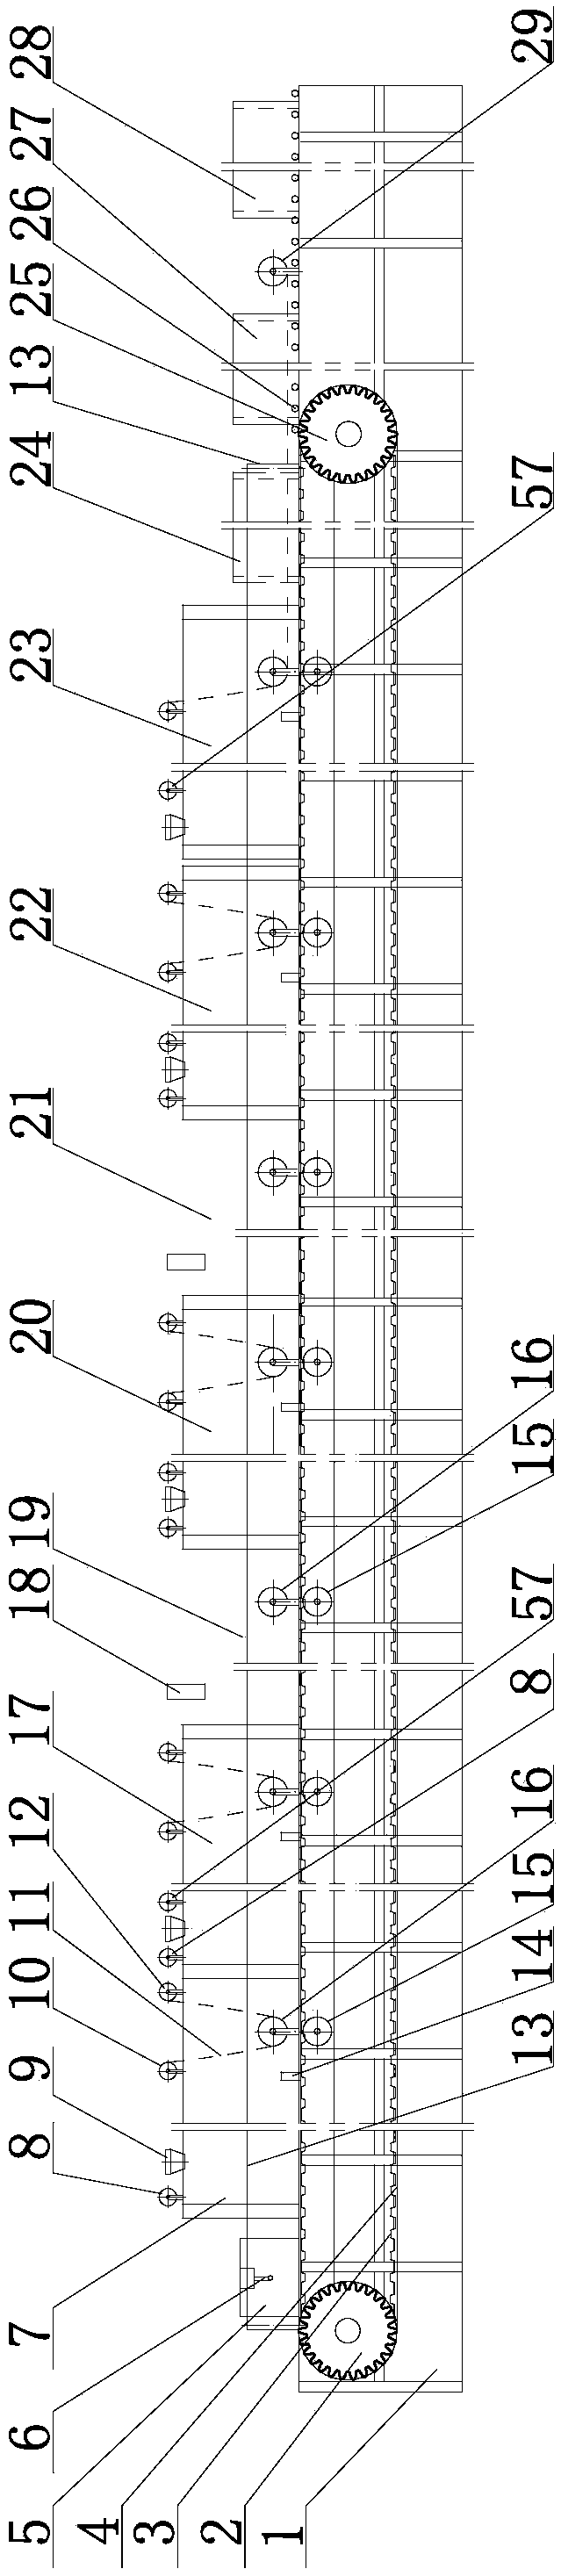 Production system for utilizing solid waste to produce thermal insulation building blocks or composite wall slabs